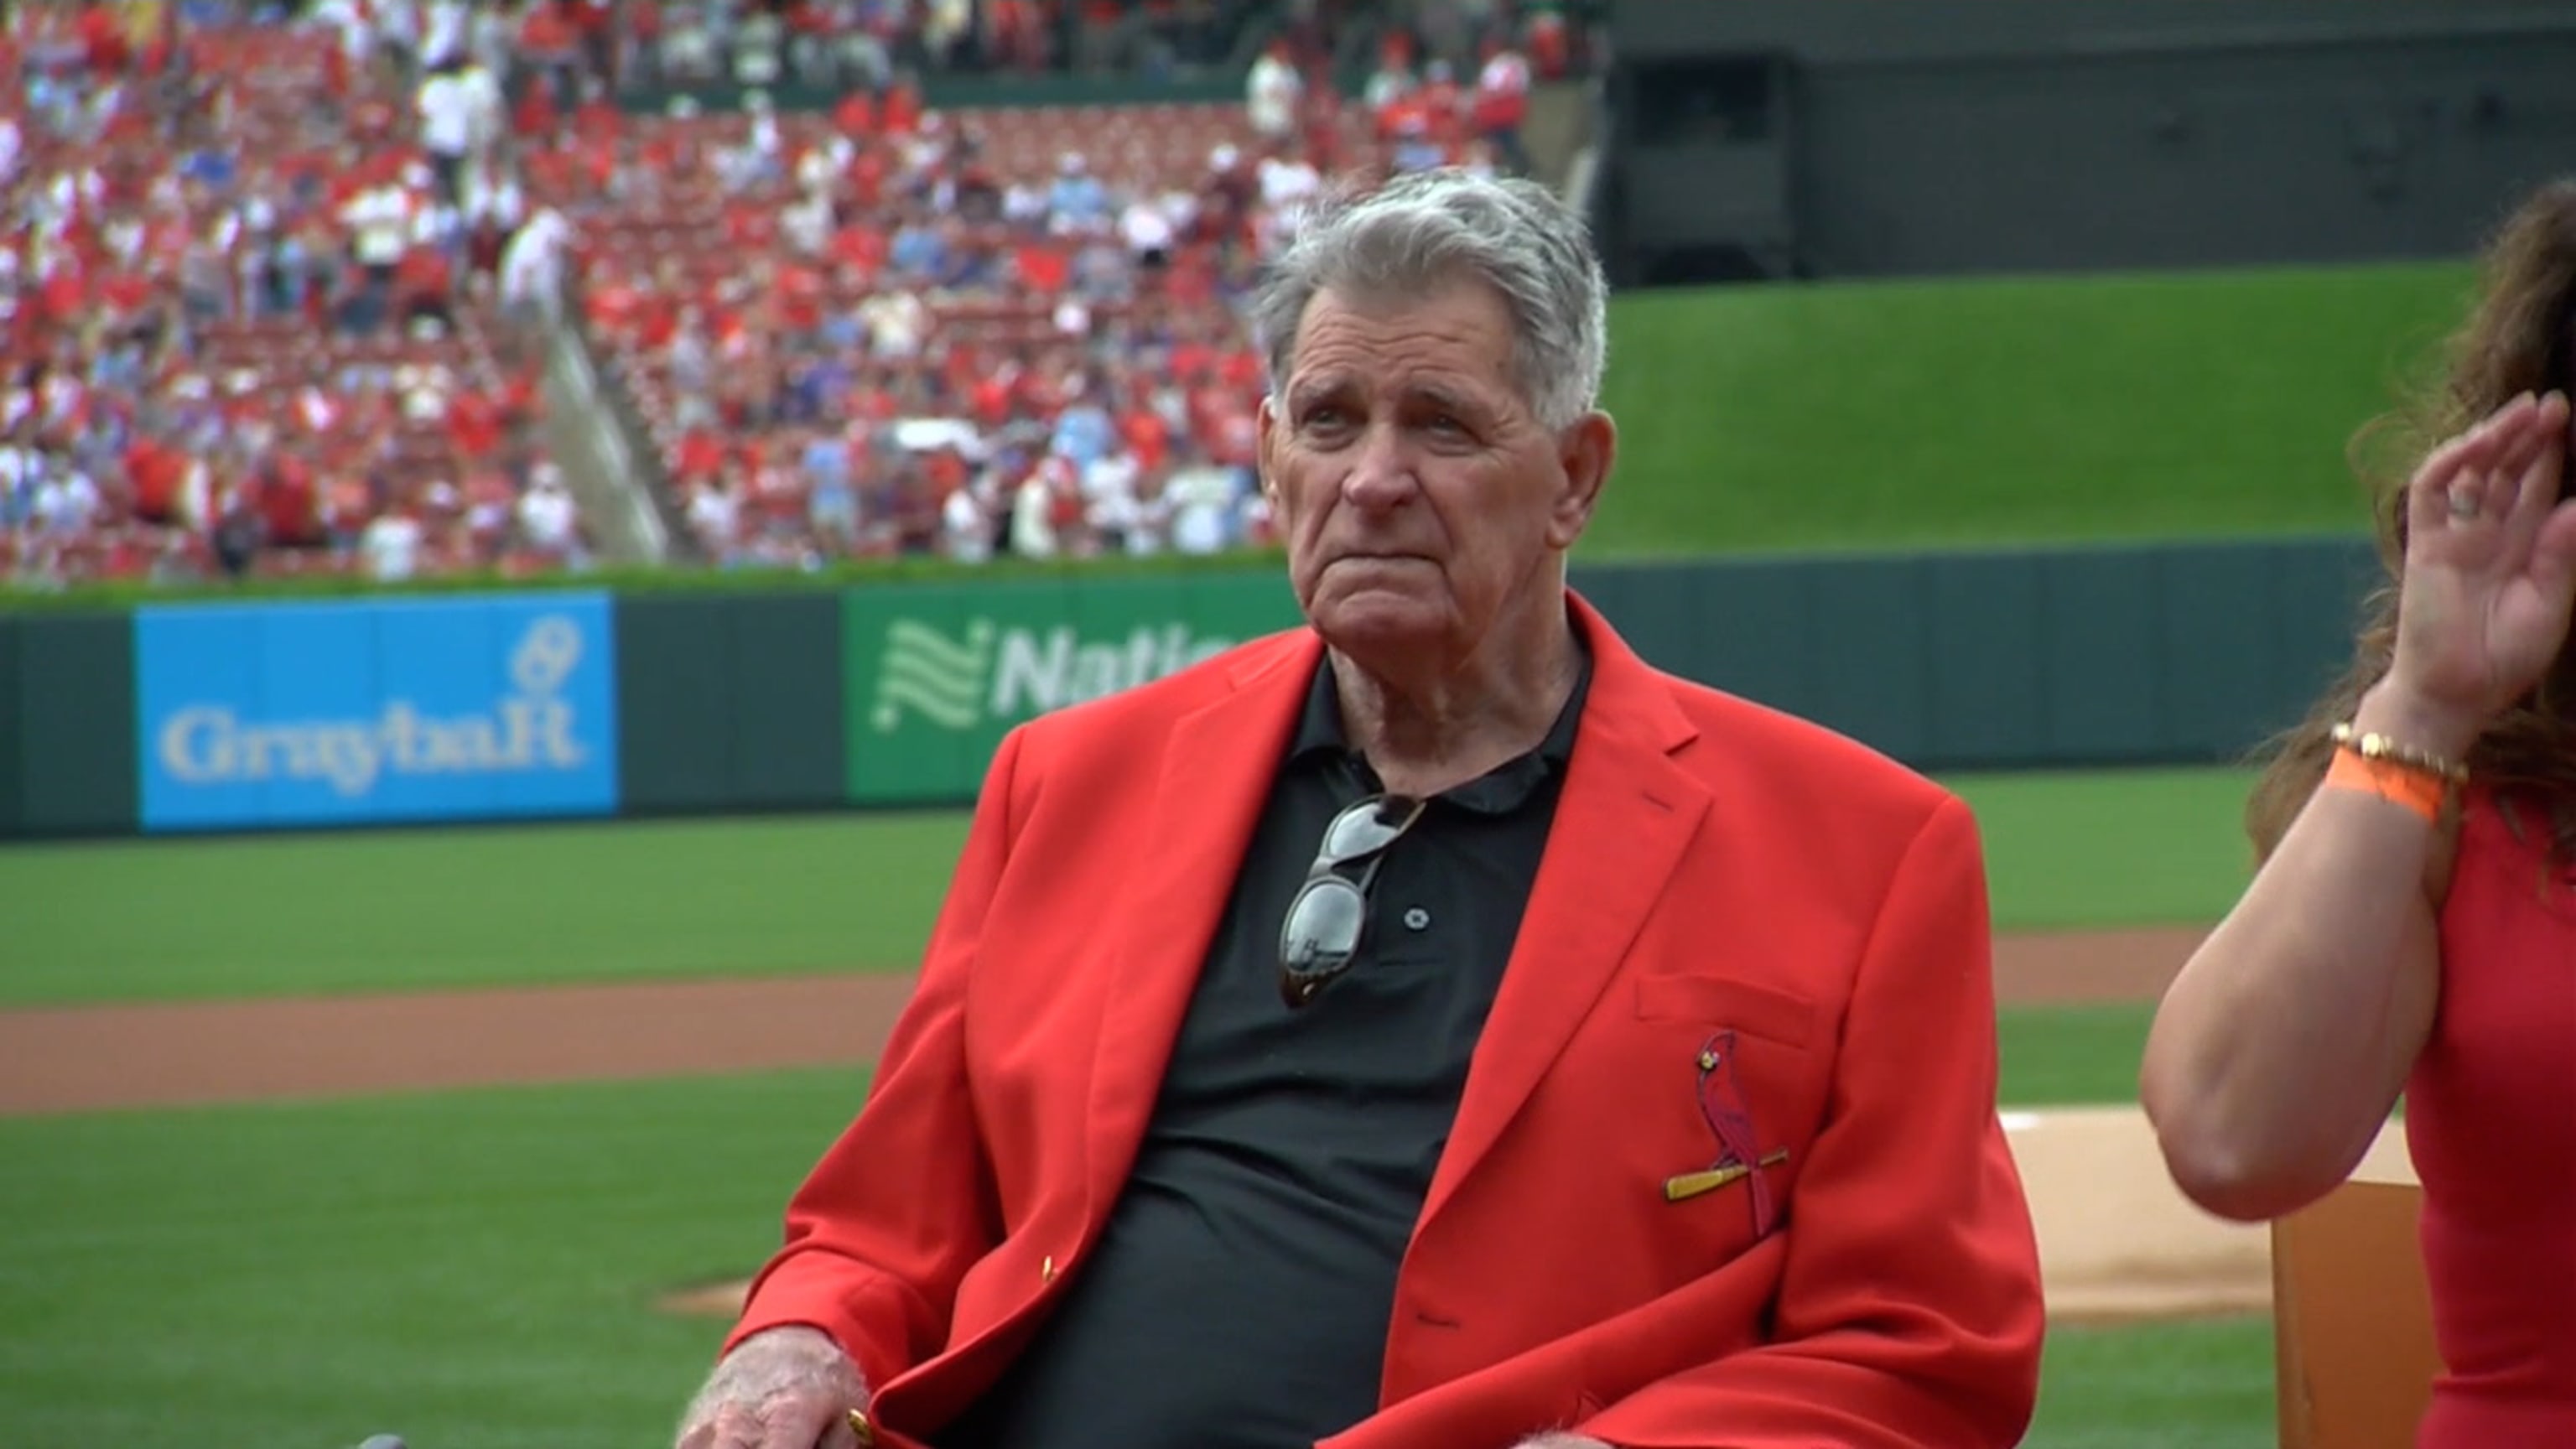 Remembering Cardinals player and broadcaster Mike Shannon